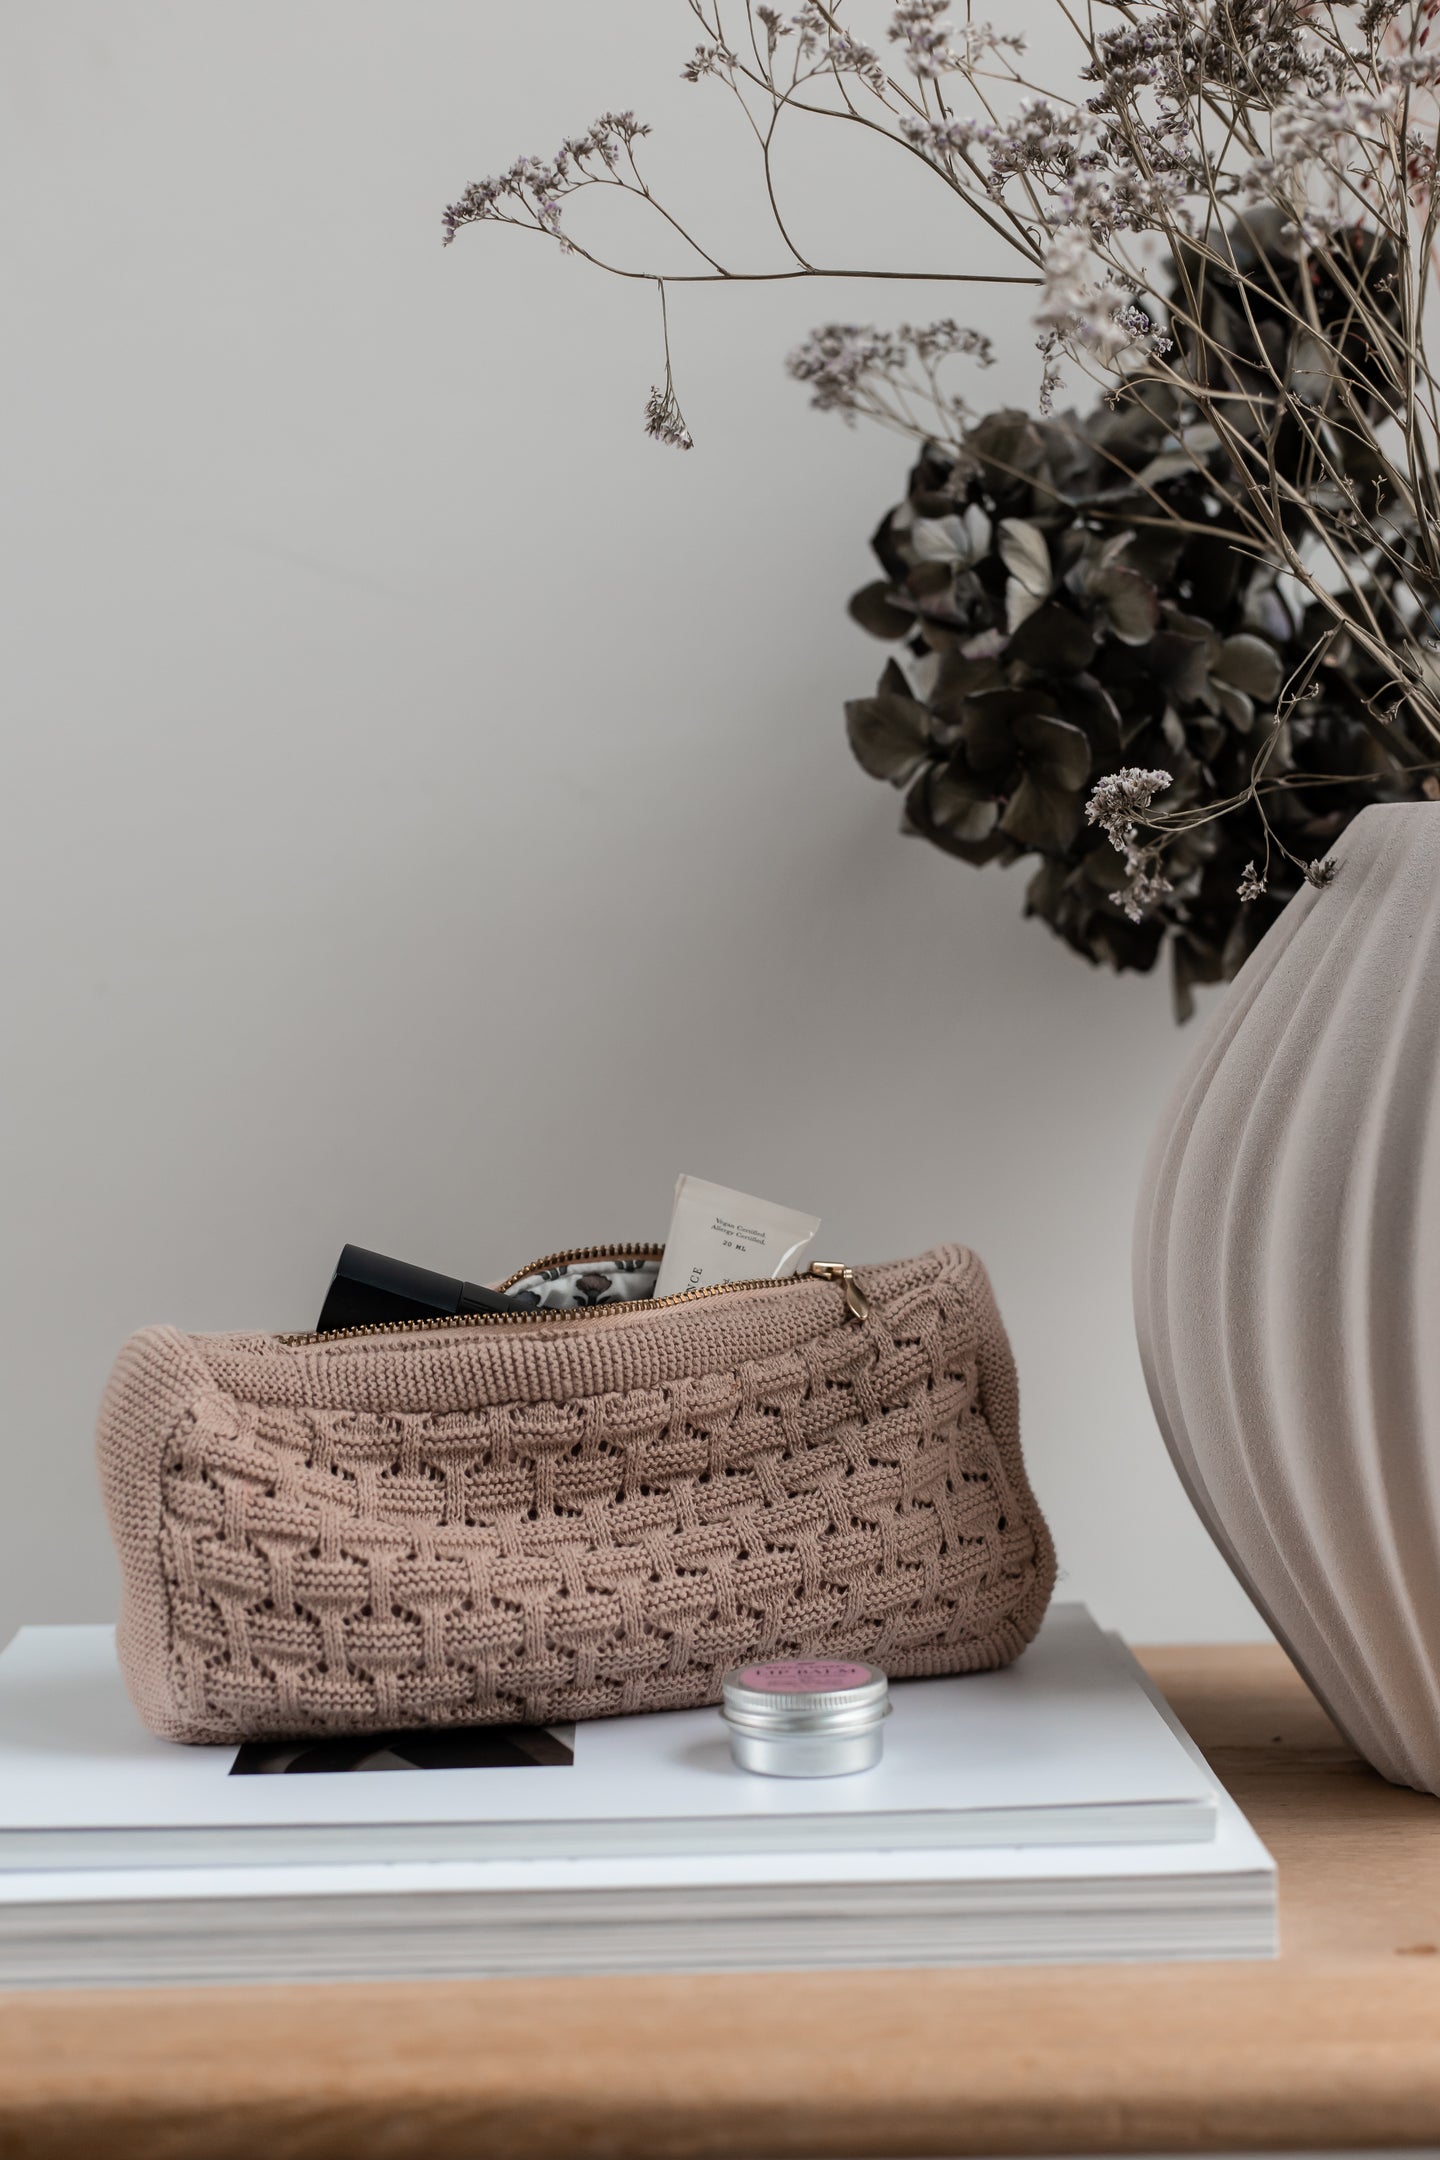 1 PIECE - EXHIBITION MODEL - KNITTED CLUTCH - PINK - 22X11X5 CM